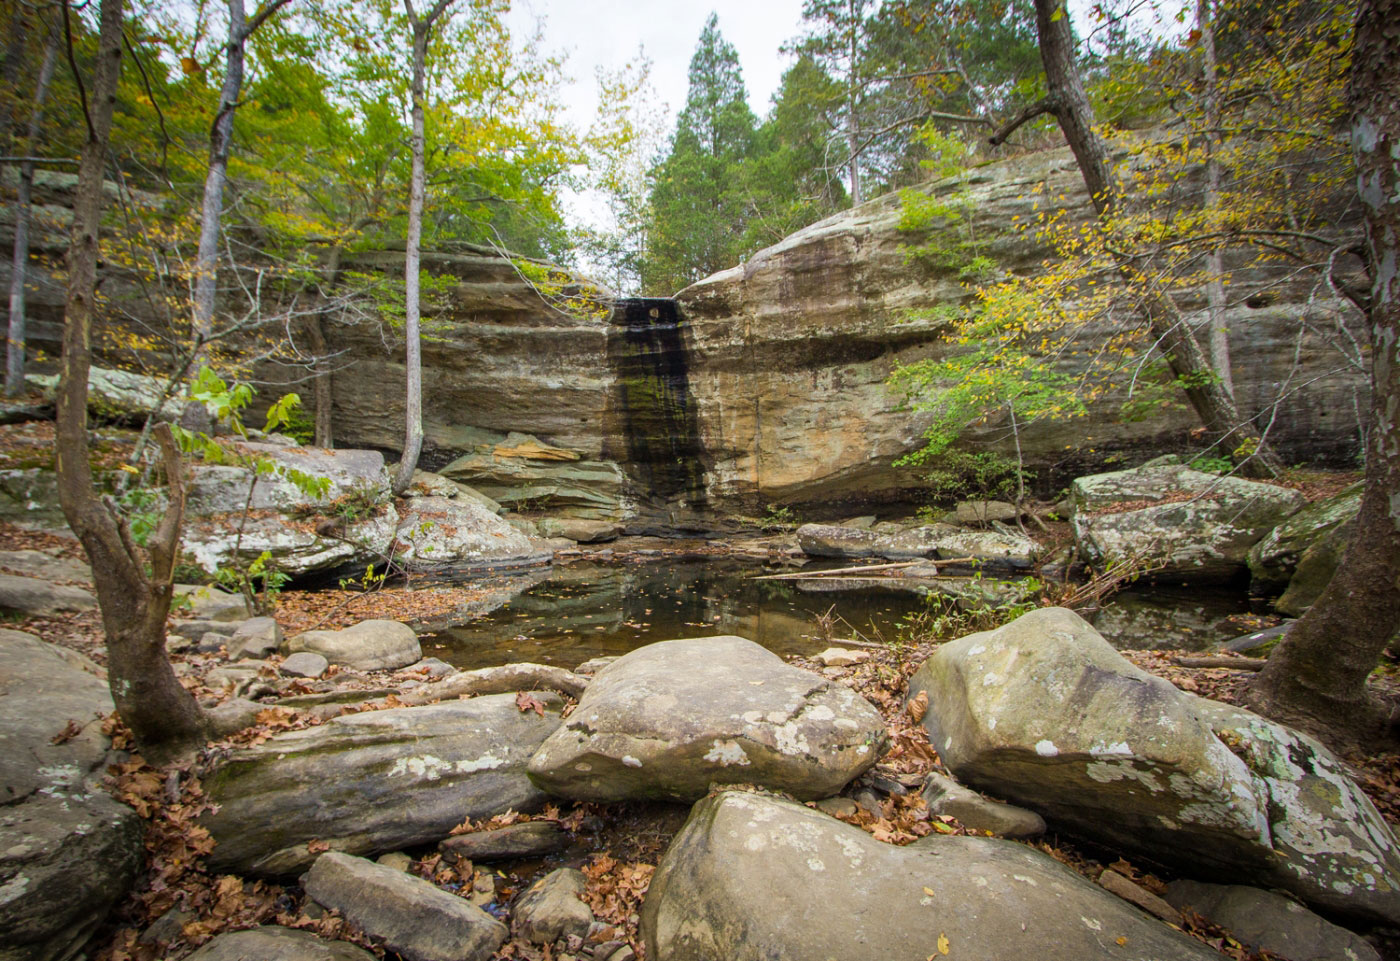 Hike Jackson Falls and Cliffs Loop in Shawnee National Forest, Illinois - Stav is Lost